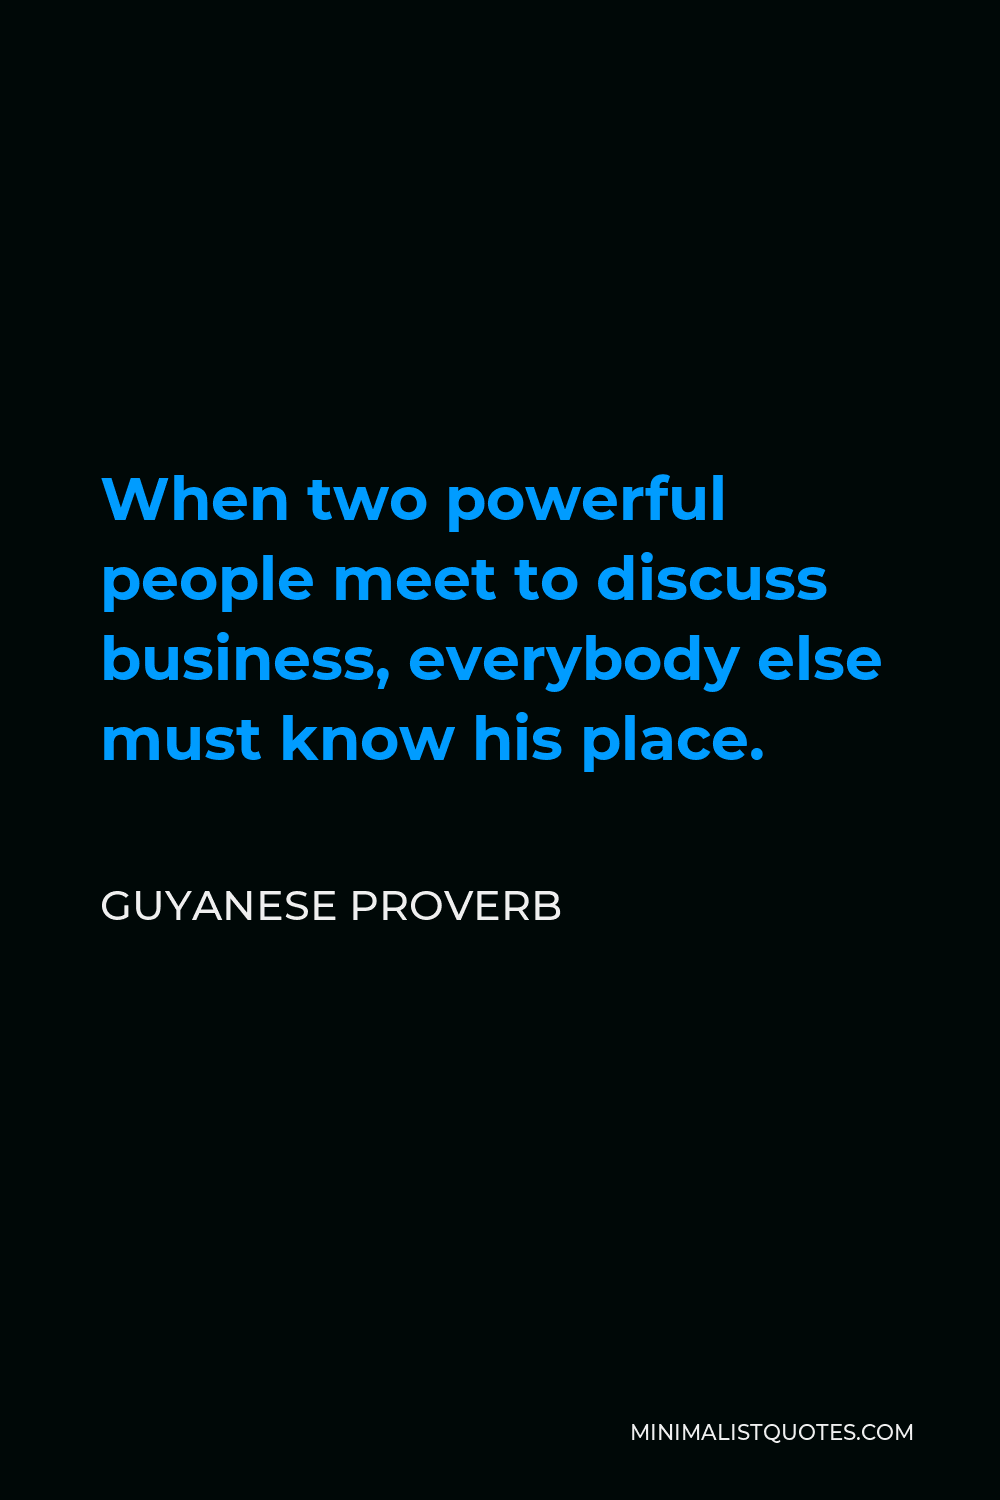 Guyanese Proverb Quote - When two powerful people meet to discuss business, everybody else must know his place.